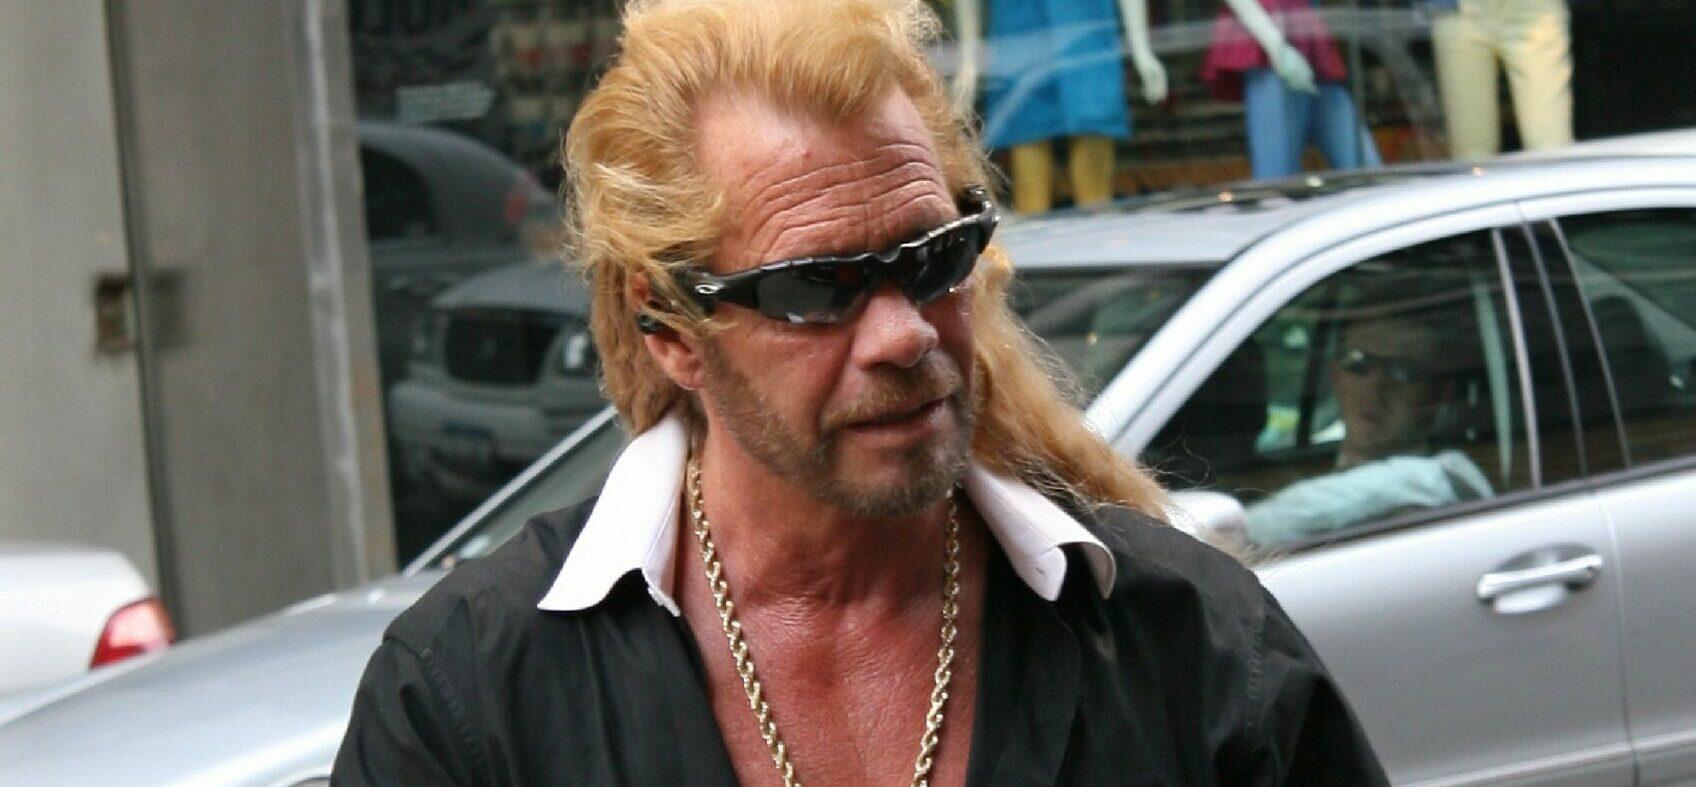 Dog The Bounty Hunter Filming Search For Brian Laundrie On Wife’s Cell Phone!